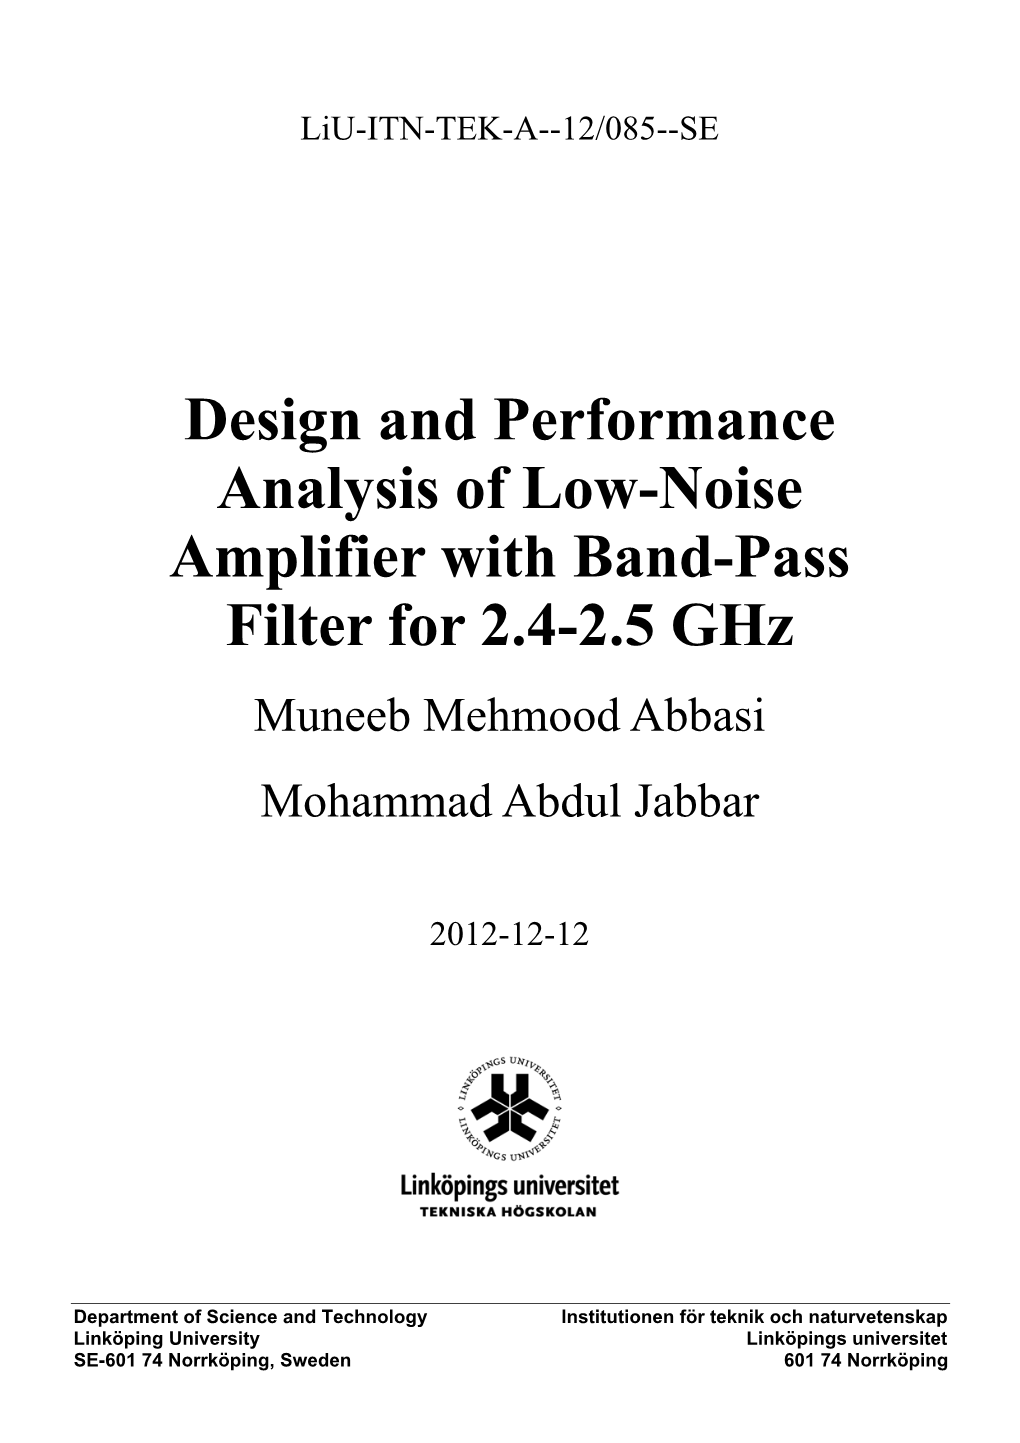 Design and Performance Analysis of Low-Noise Amplifier with Band-Pass Filter for 2.4-2.5 Ghz Muneeb Mehmood Abbasi Mohammad Abdul Jabbar